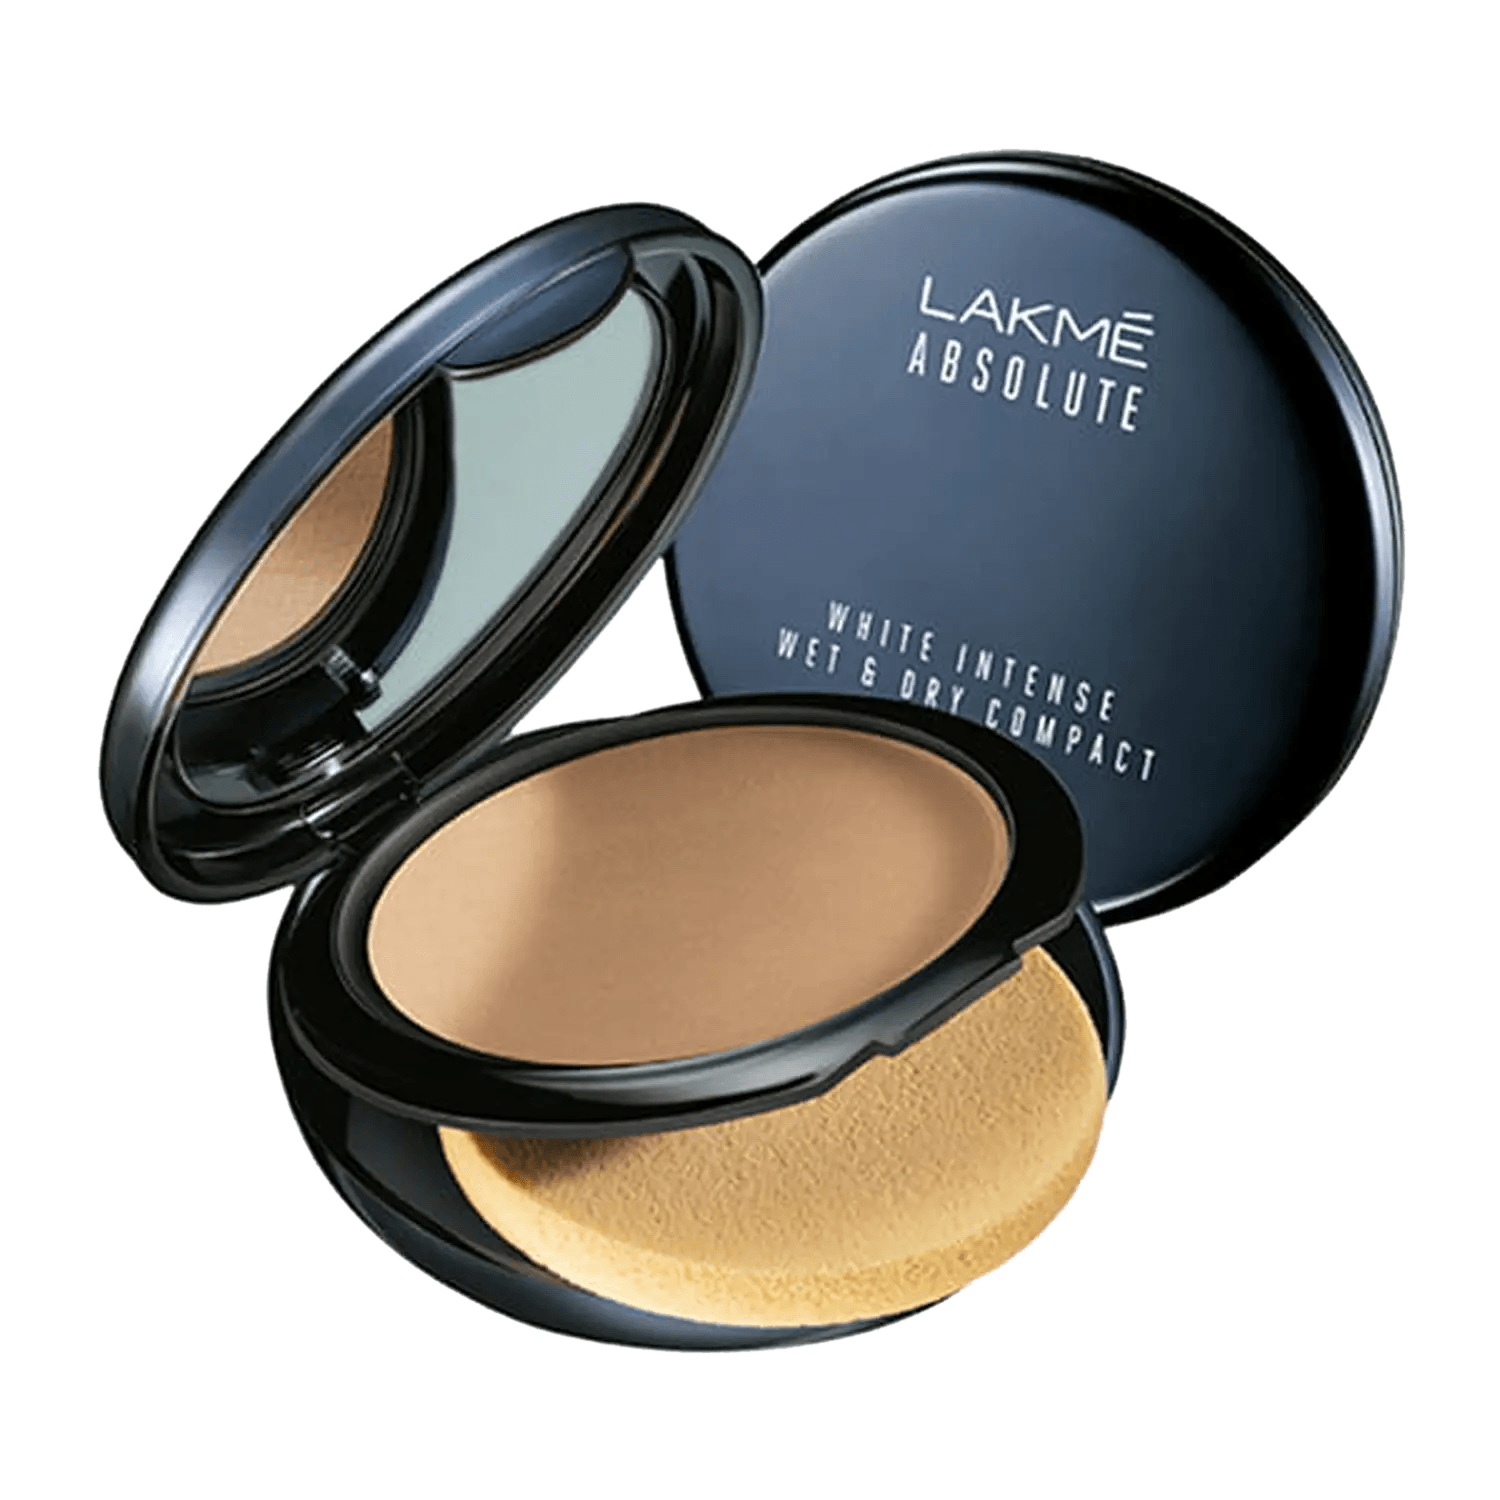 Lakme | Lakme Absolute White Intense Wet & Dry Compact - Beige Honey 05 (9g)